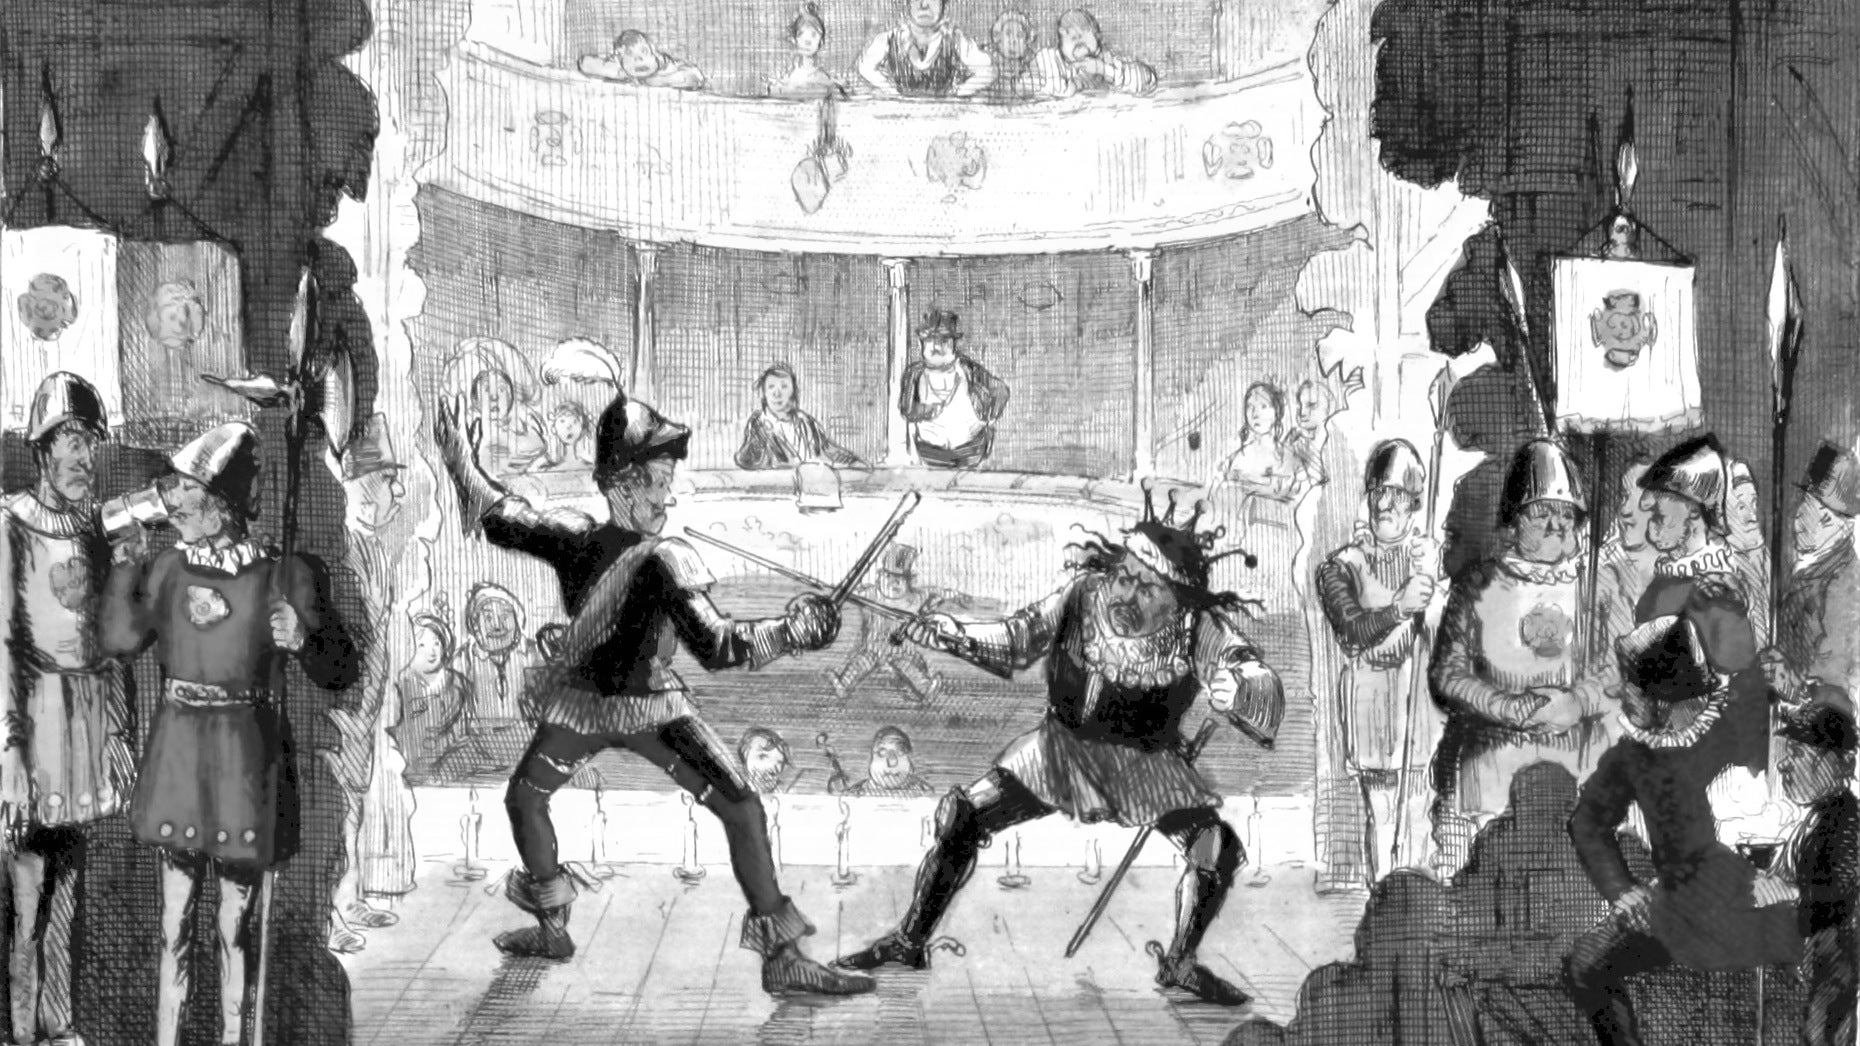 Actors duelling on stage in an illustration from 'The Comic history of England'.